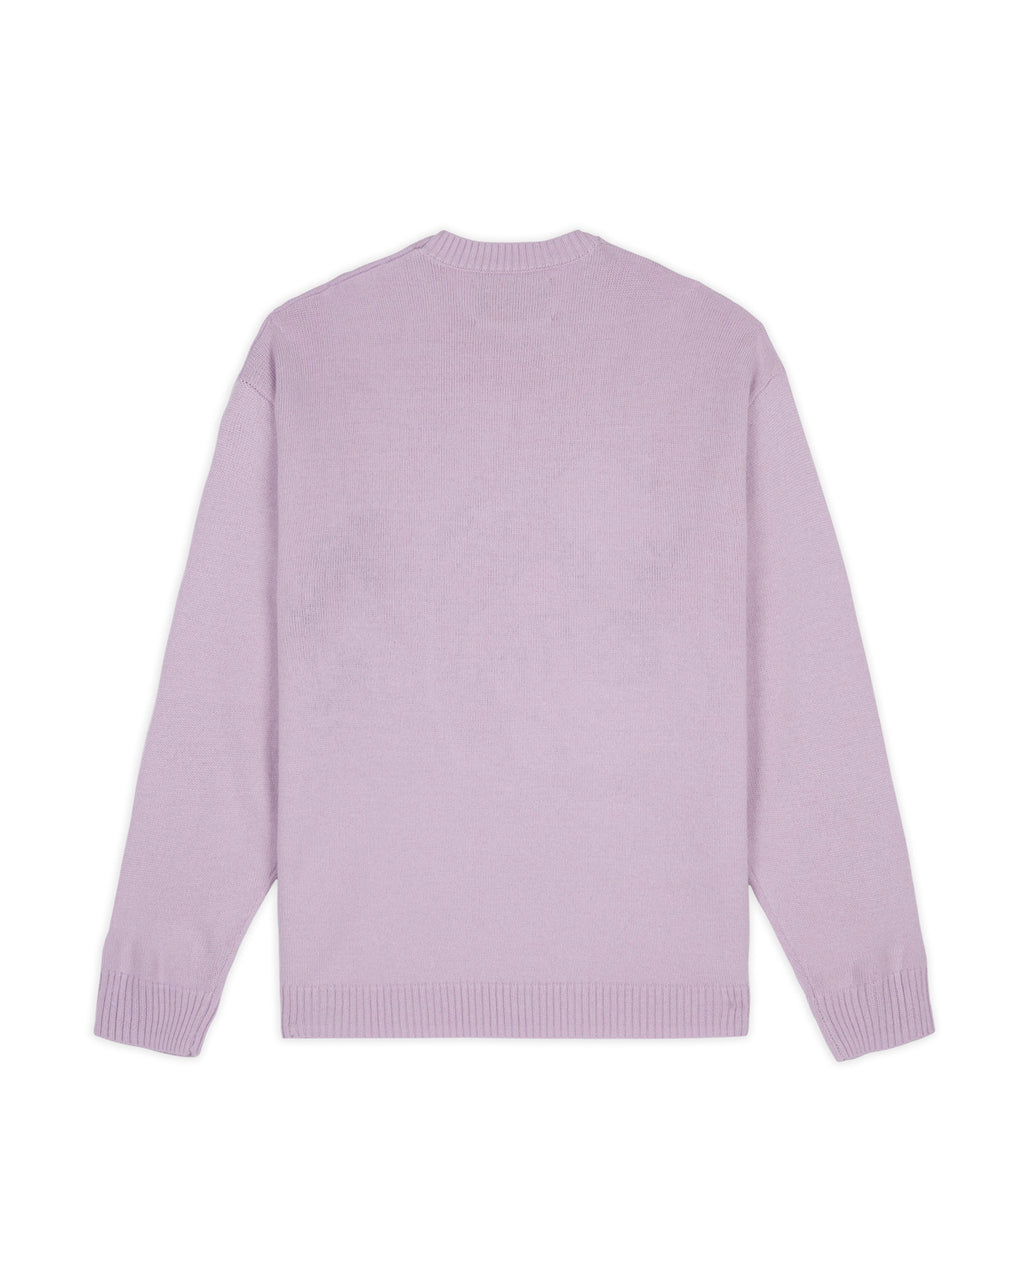 Hammer Sweater - Lilac 2